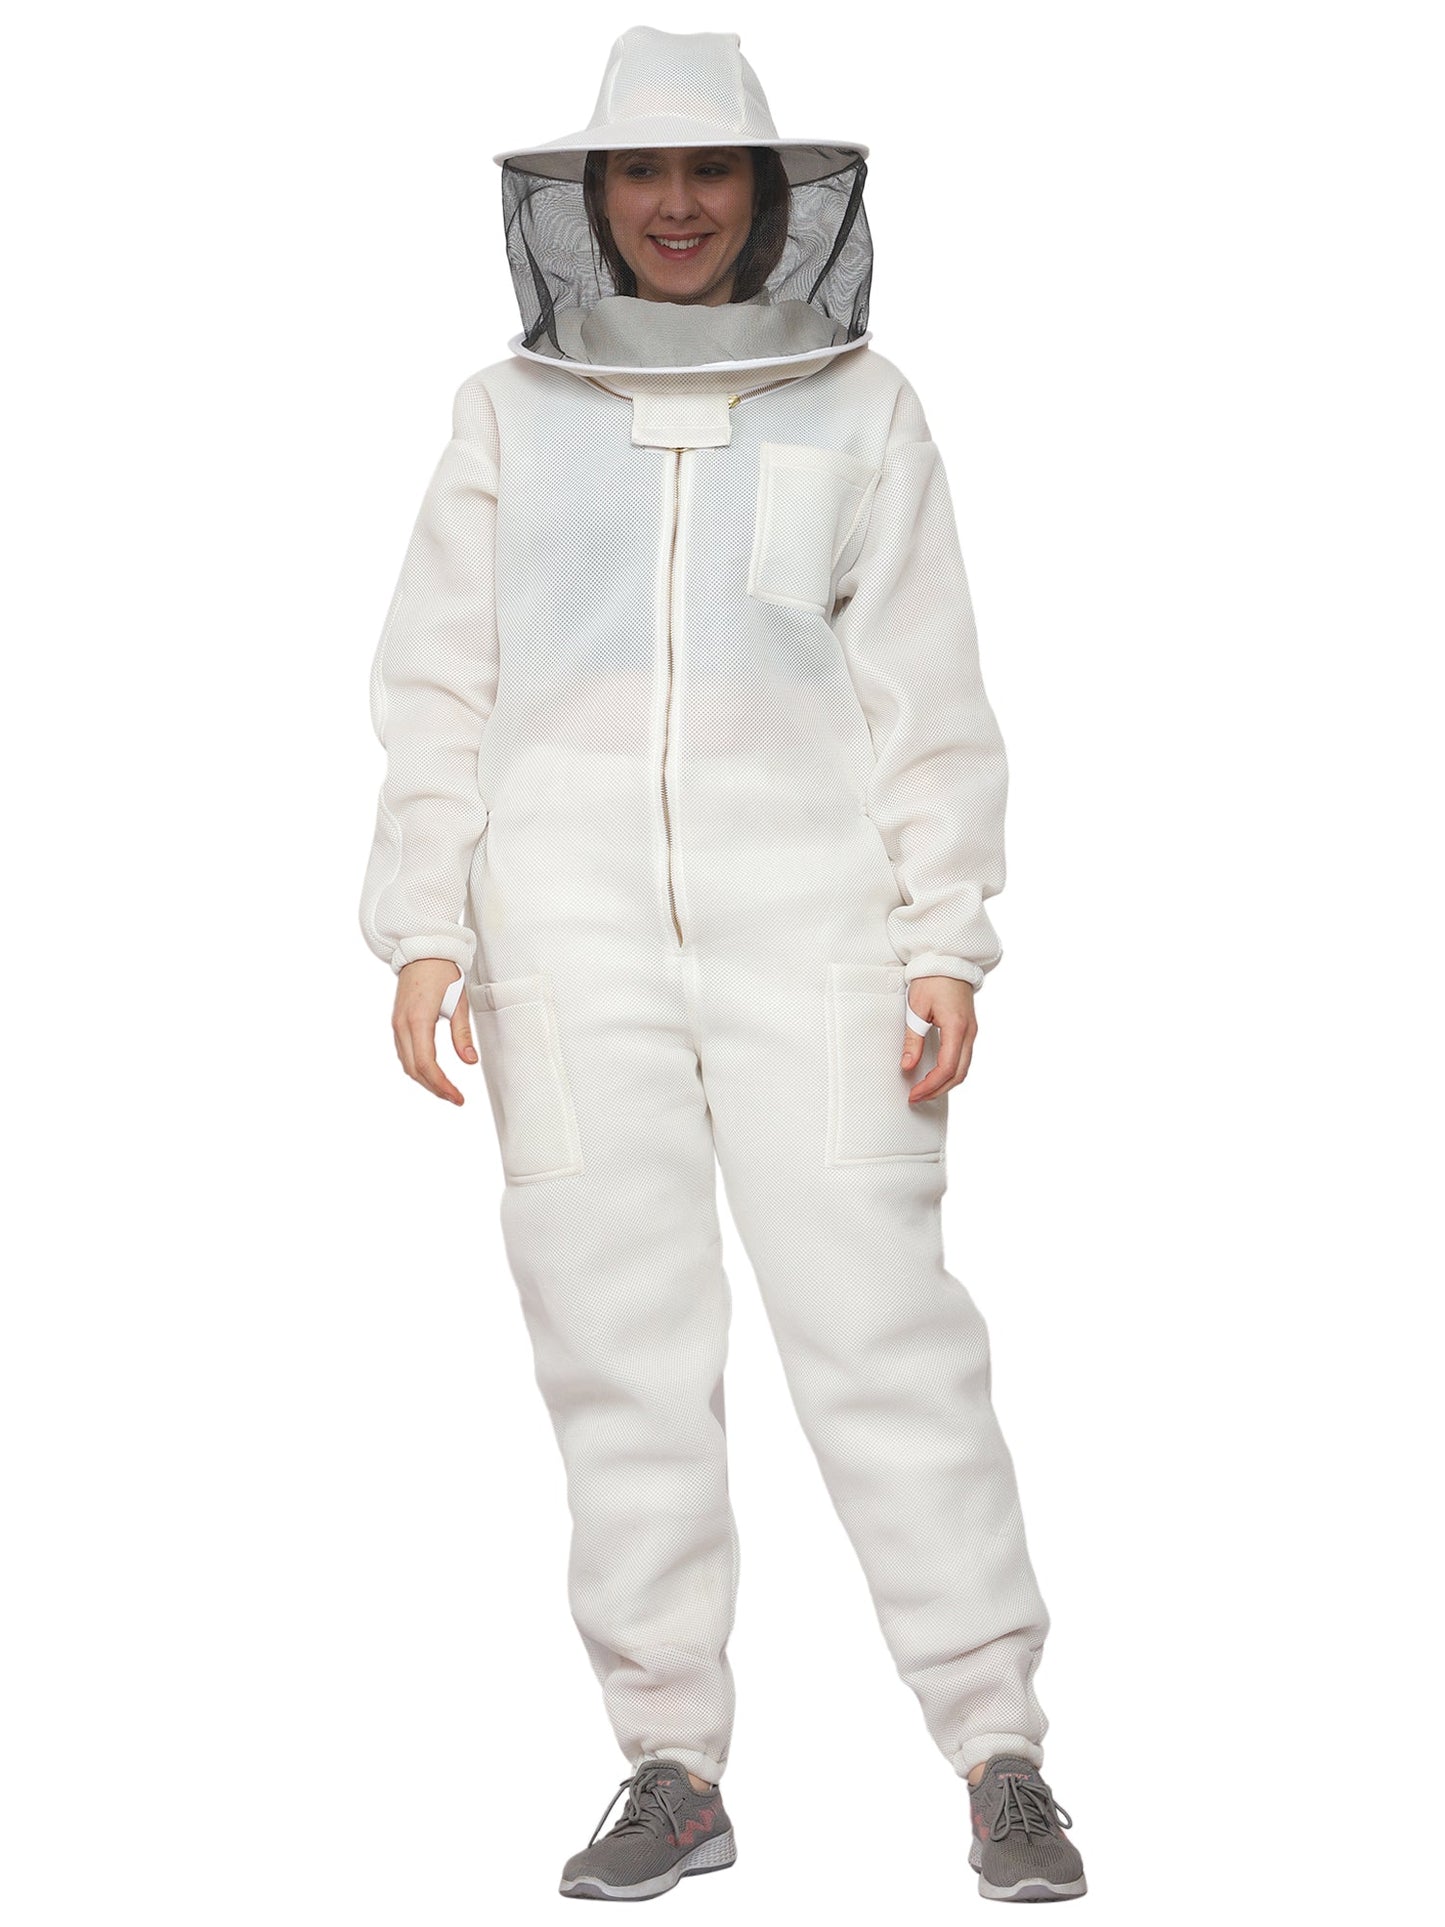 Beeattire Airmesh Ventilated beekeeping Suit White Color with Round Hood For Women